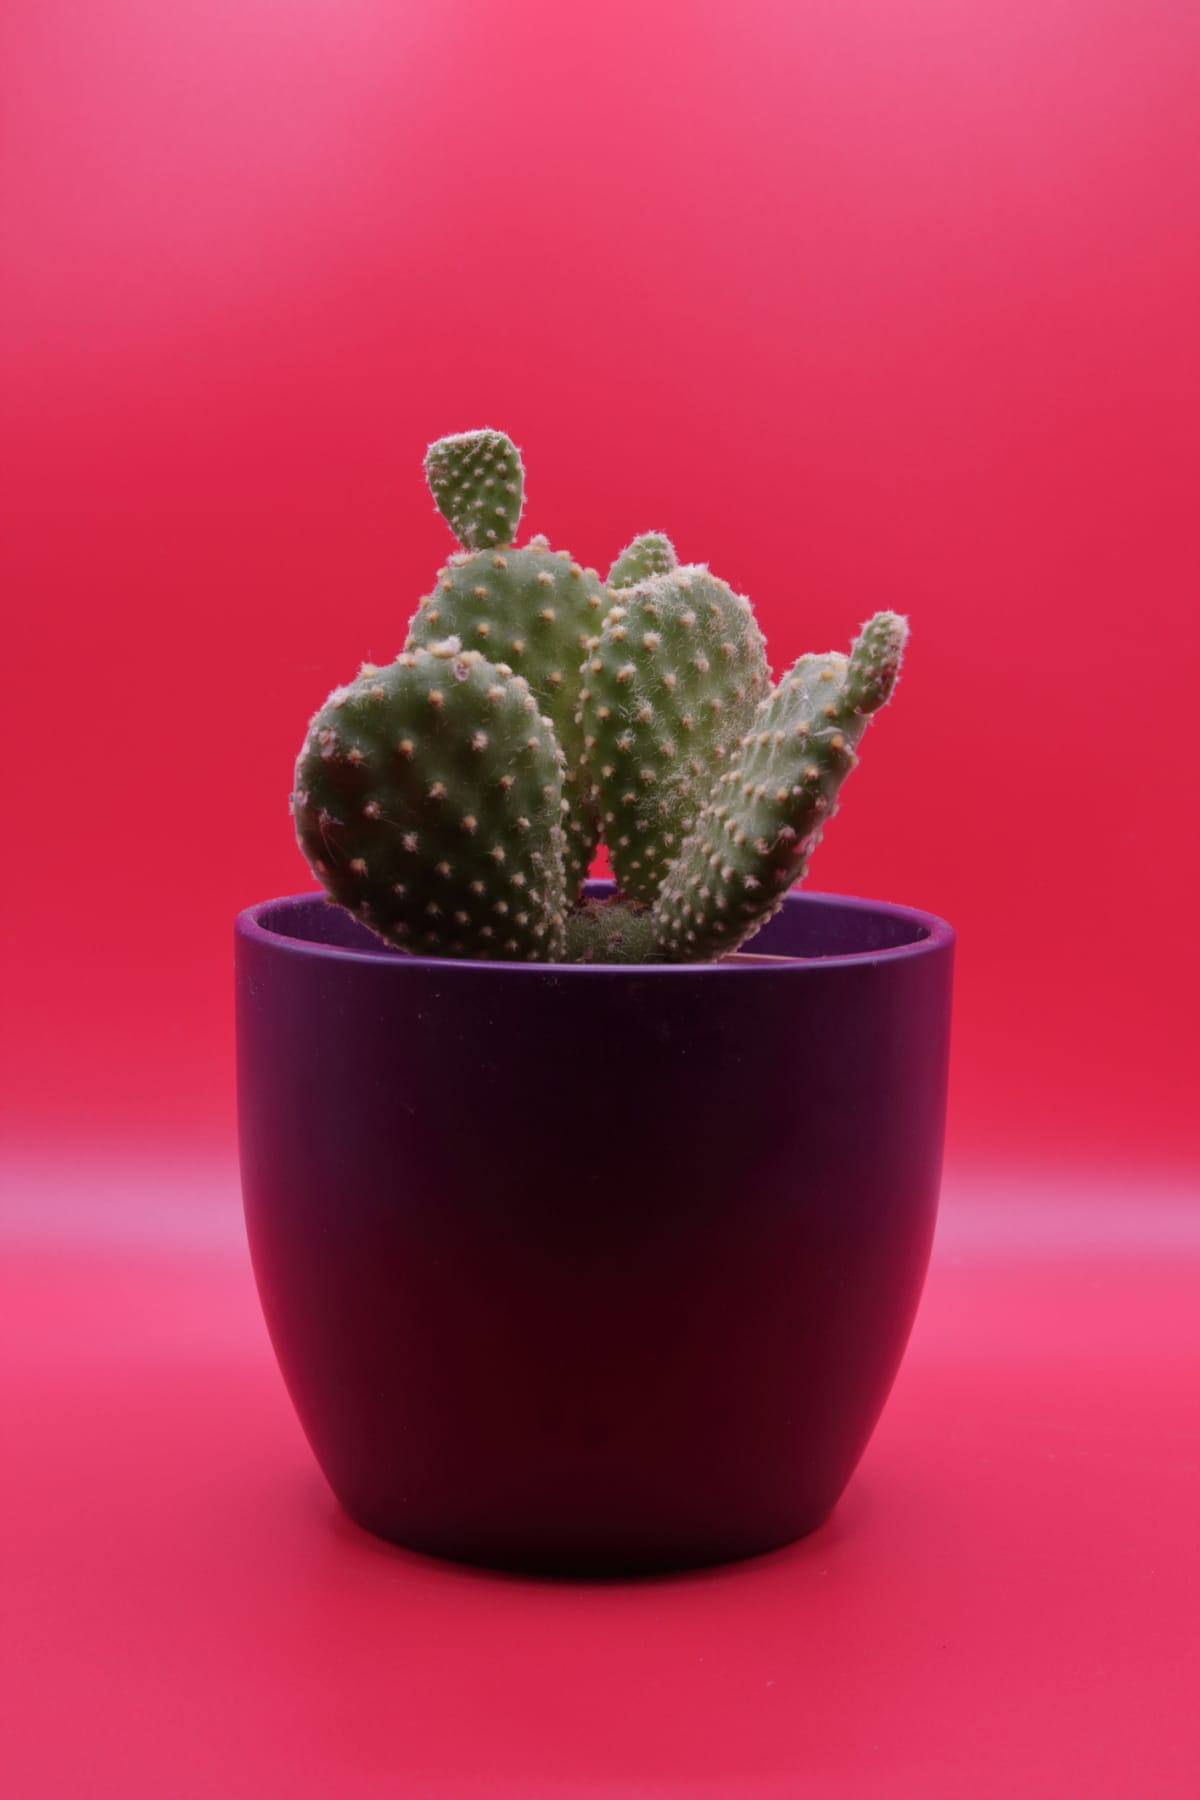 Potted cactus in purple pot on pink background